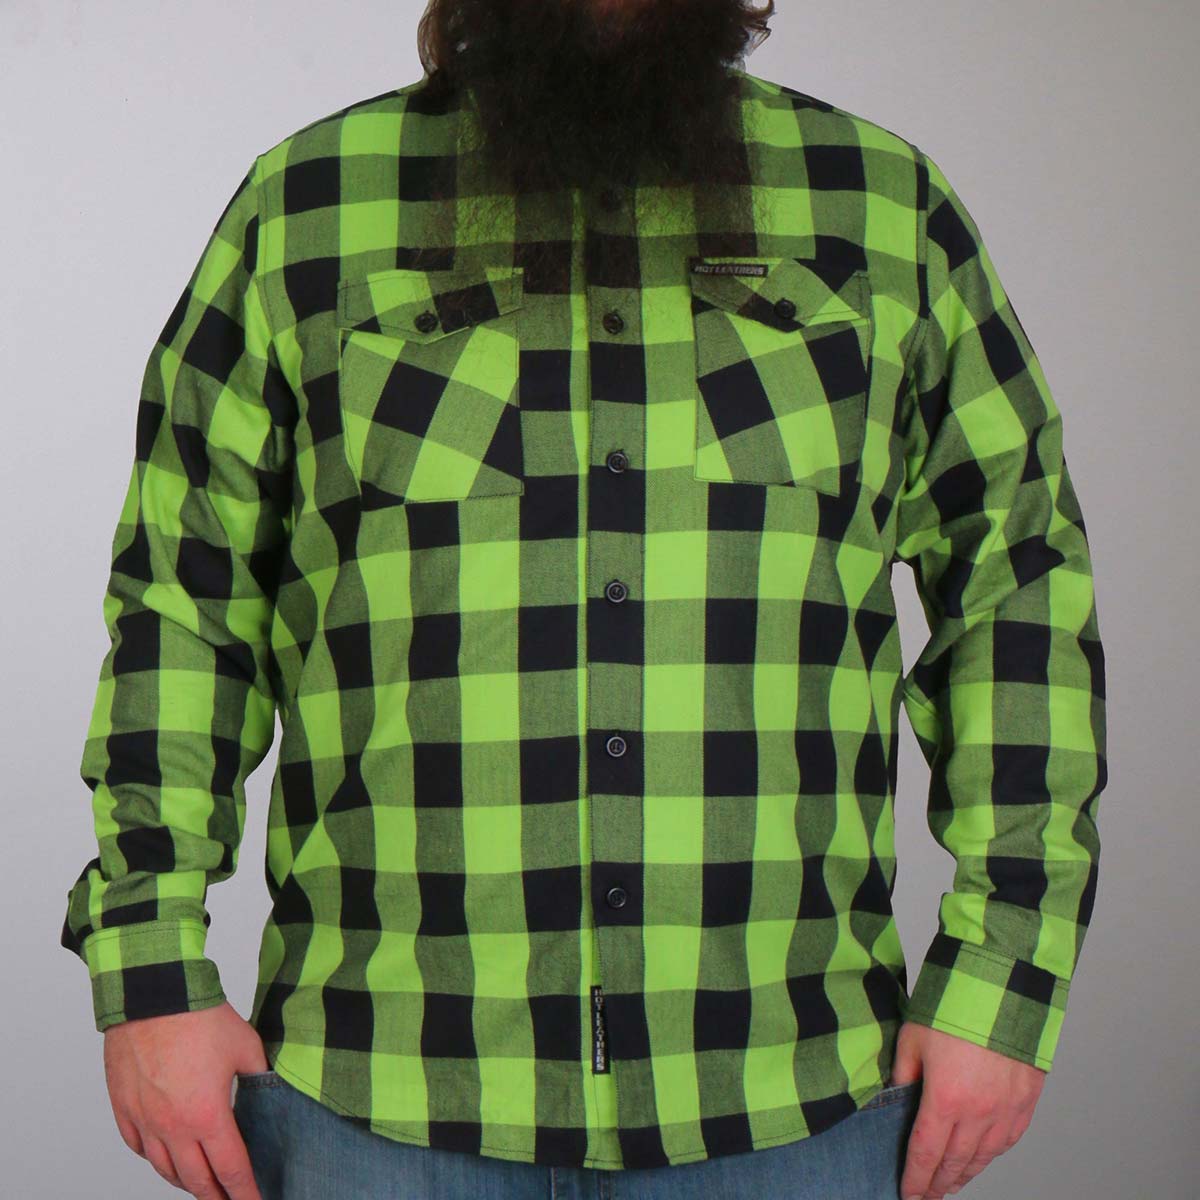 Hot Leathers FLM2005 Men's Black and Green Long Sleeve Flannel Shirt